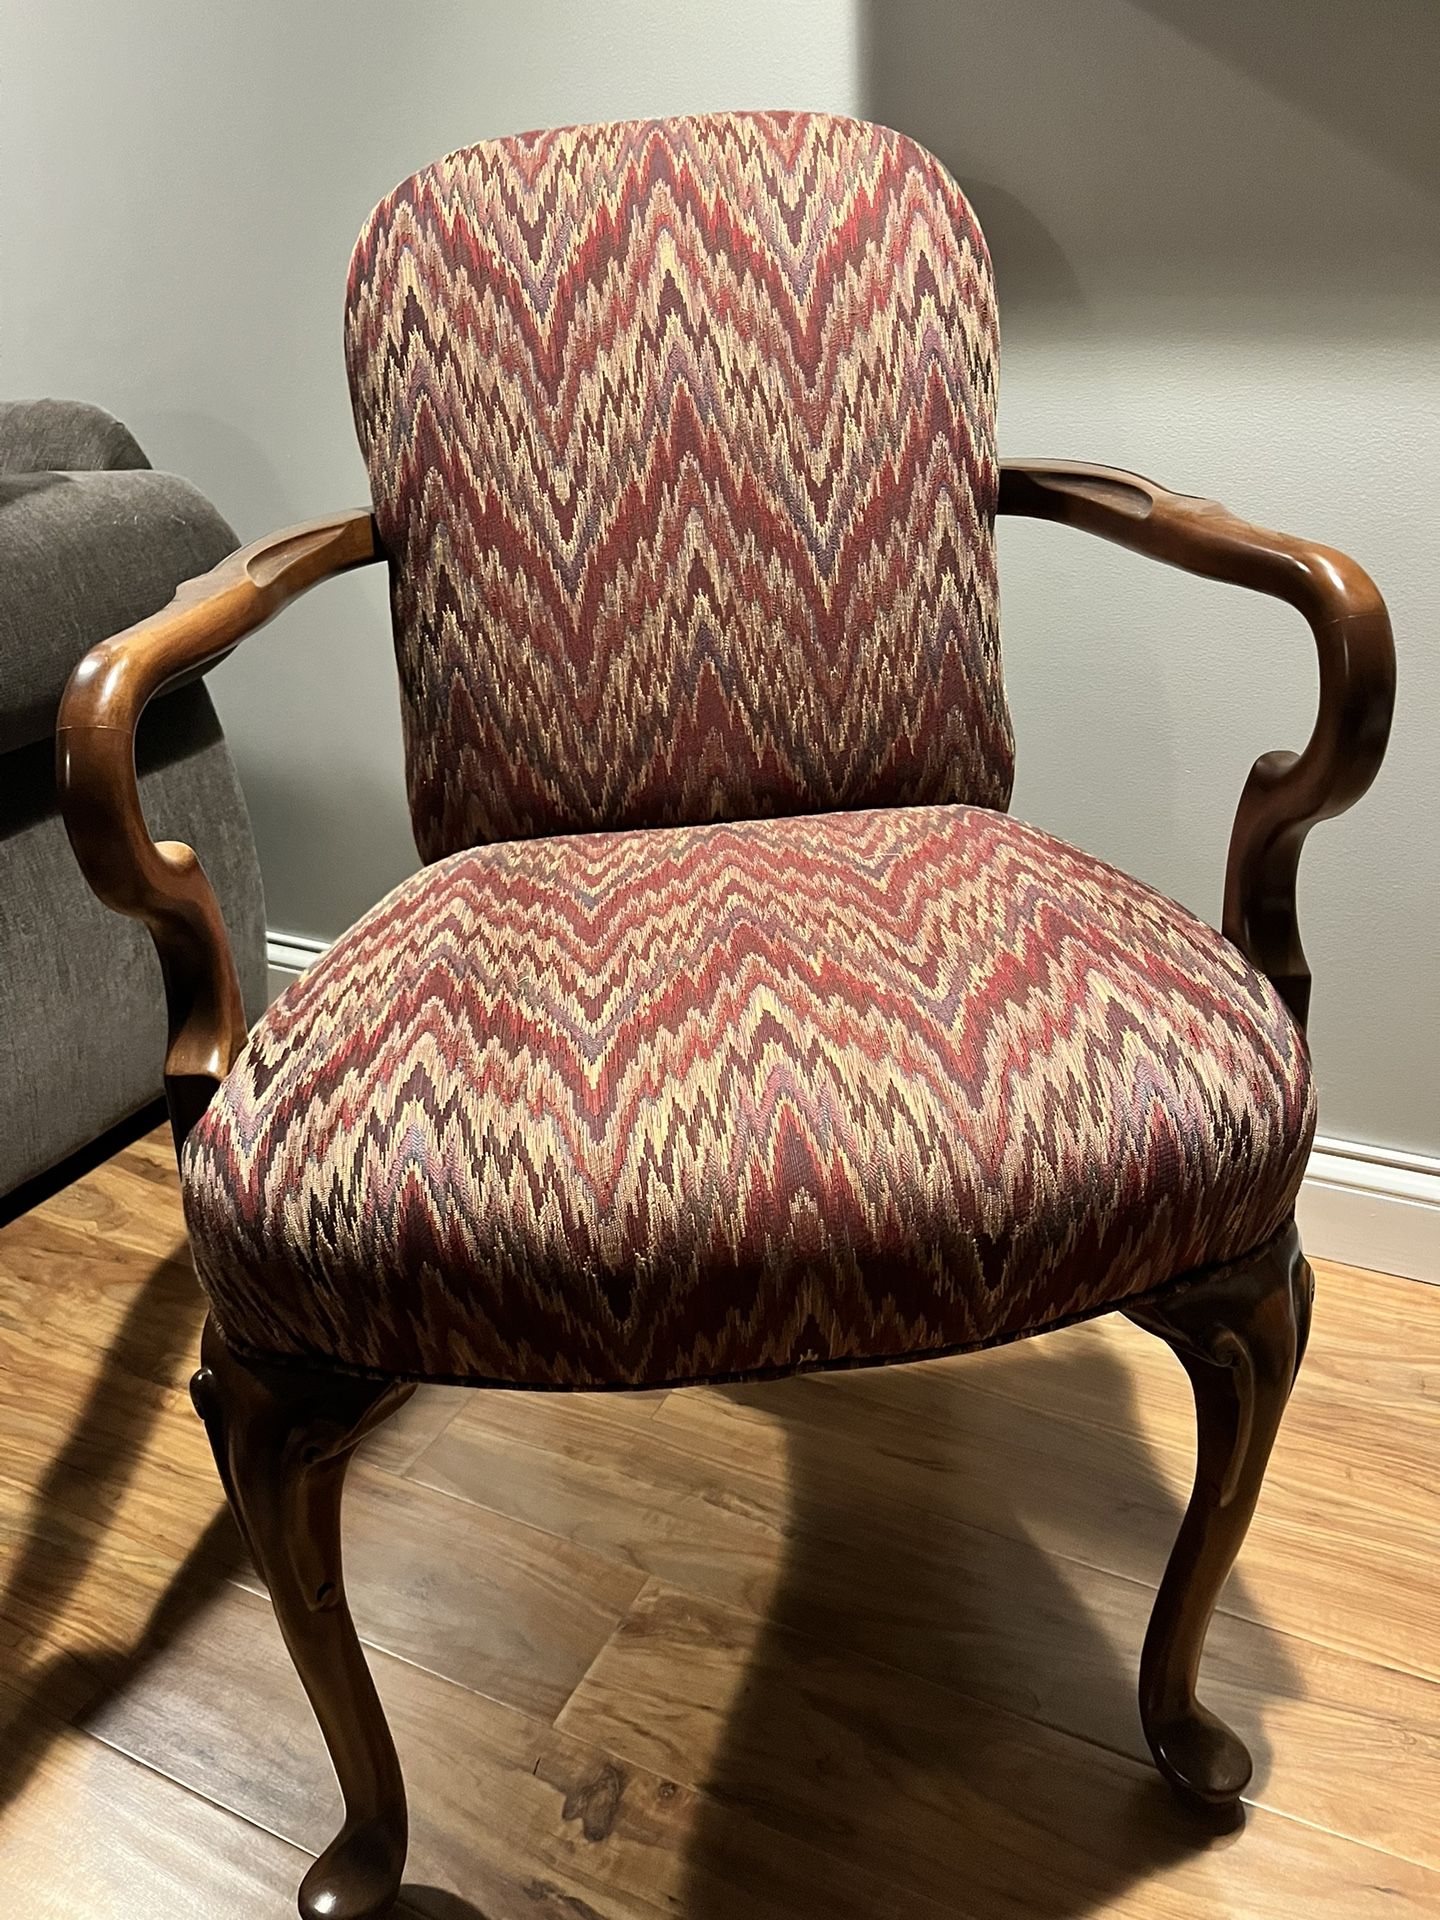 Vintage Striped Chair